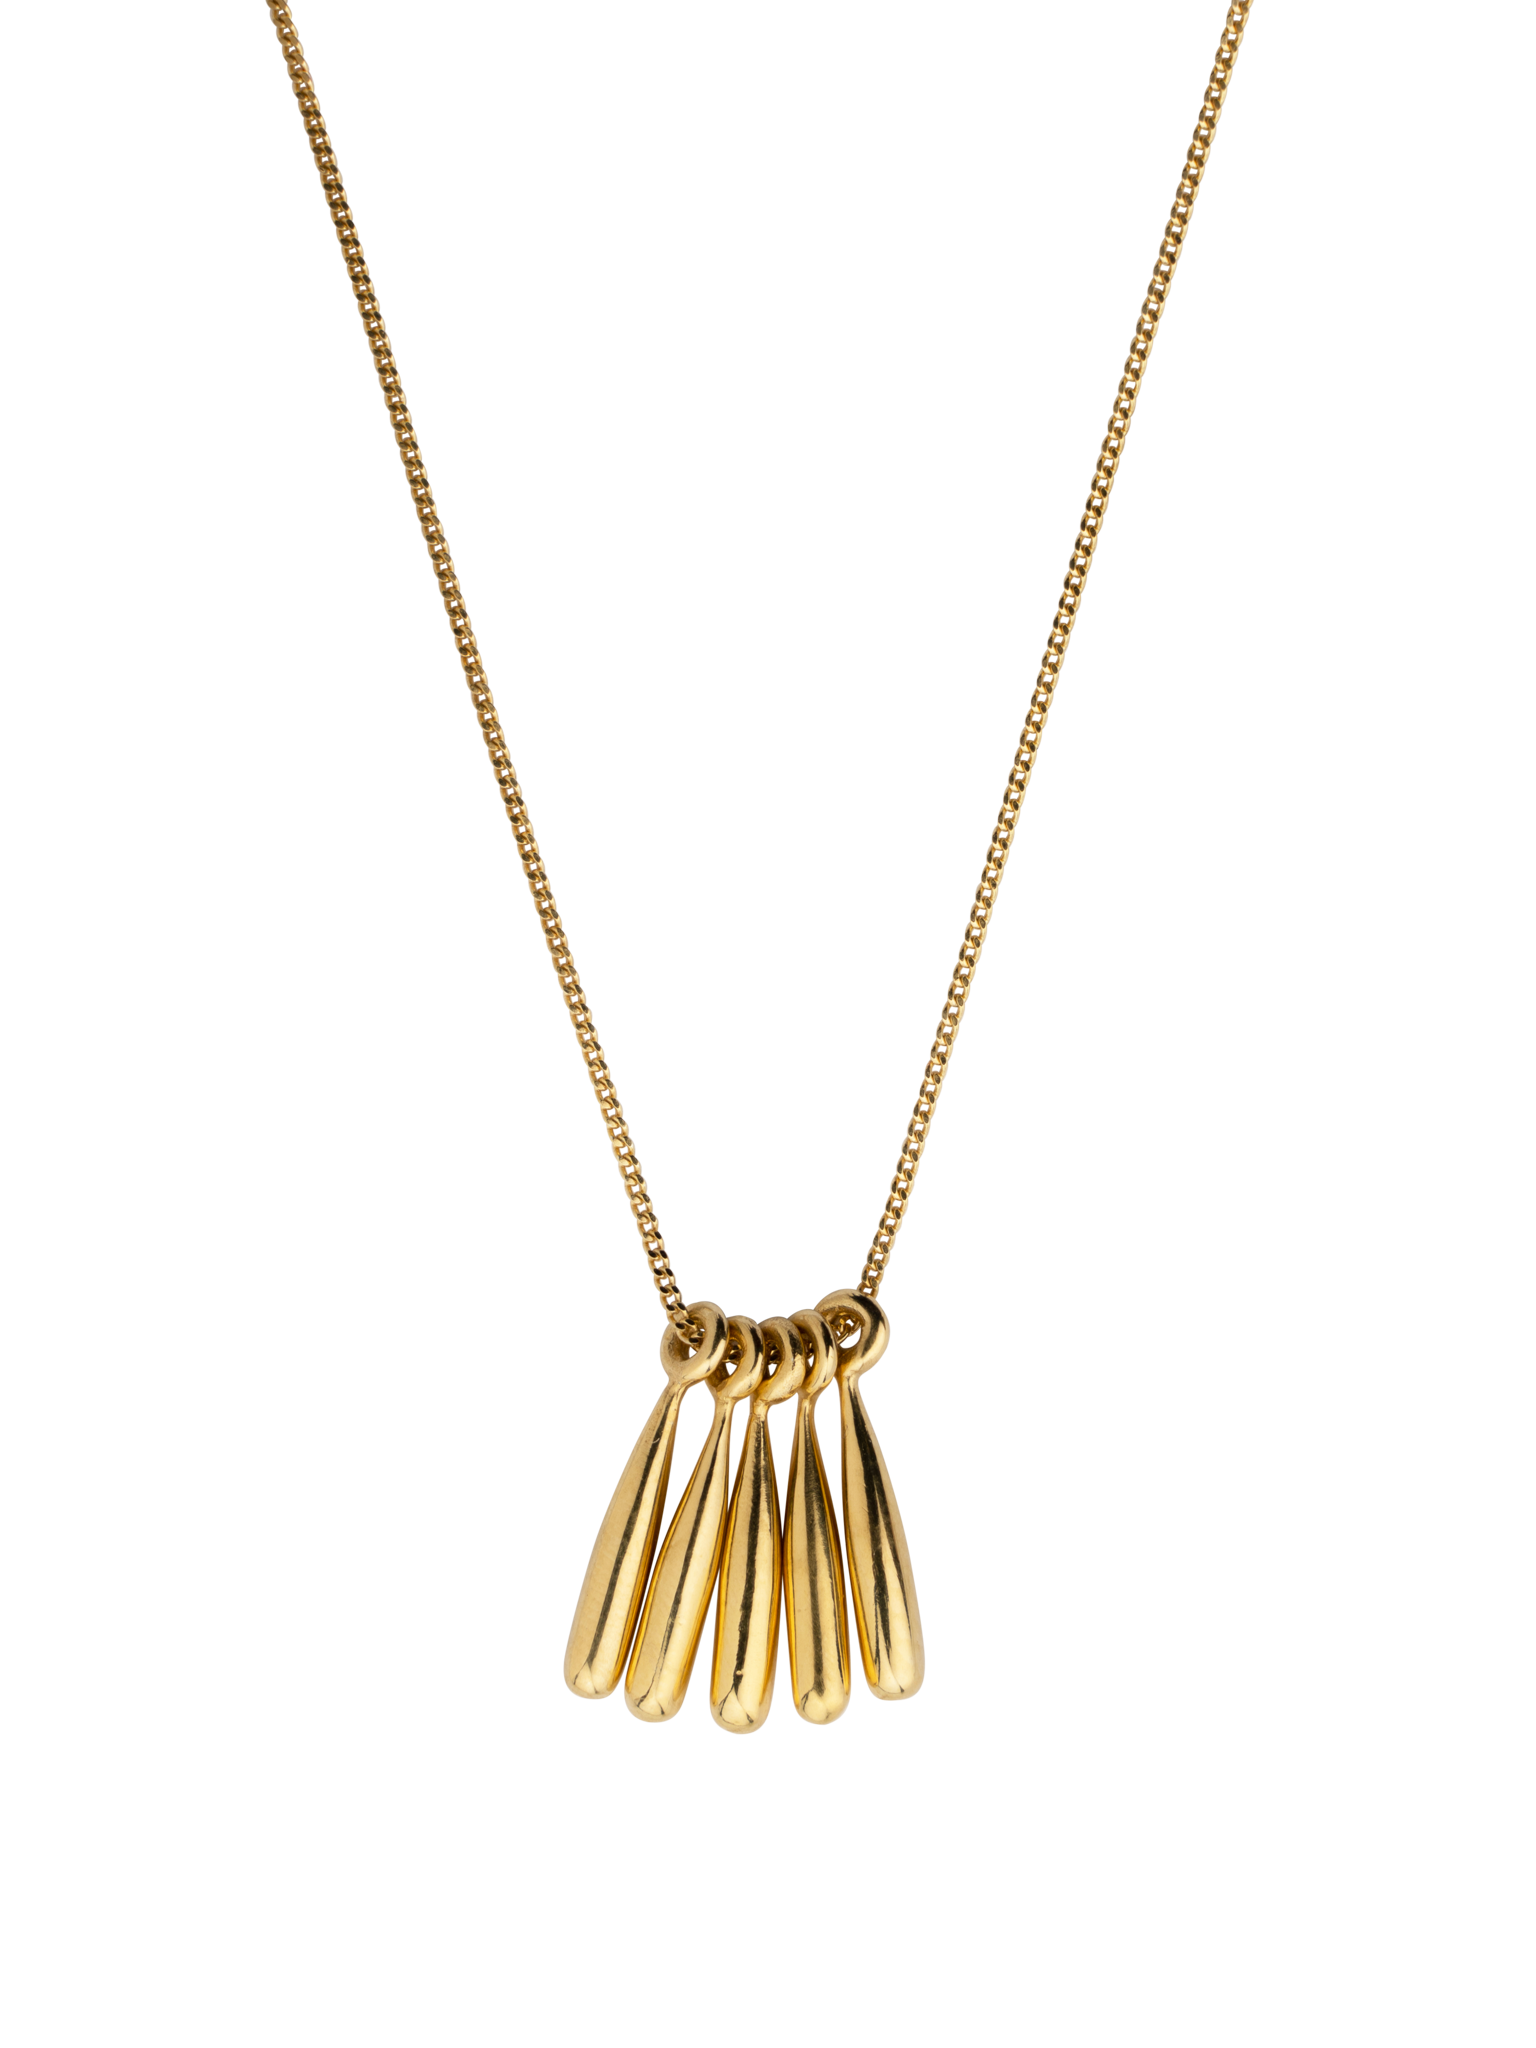 Golden skittle curb necklace